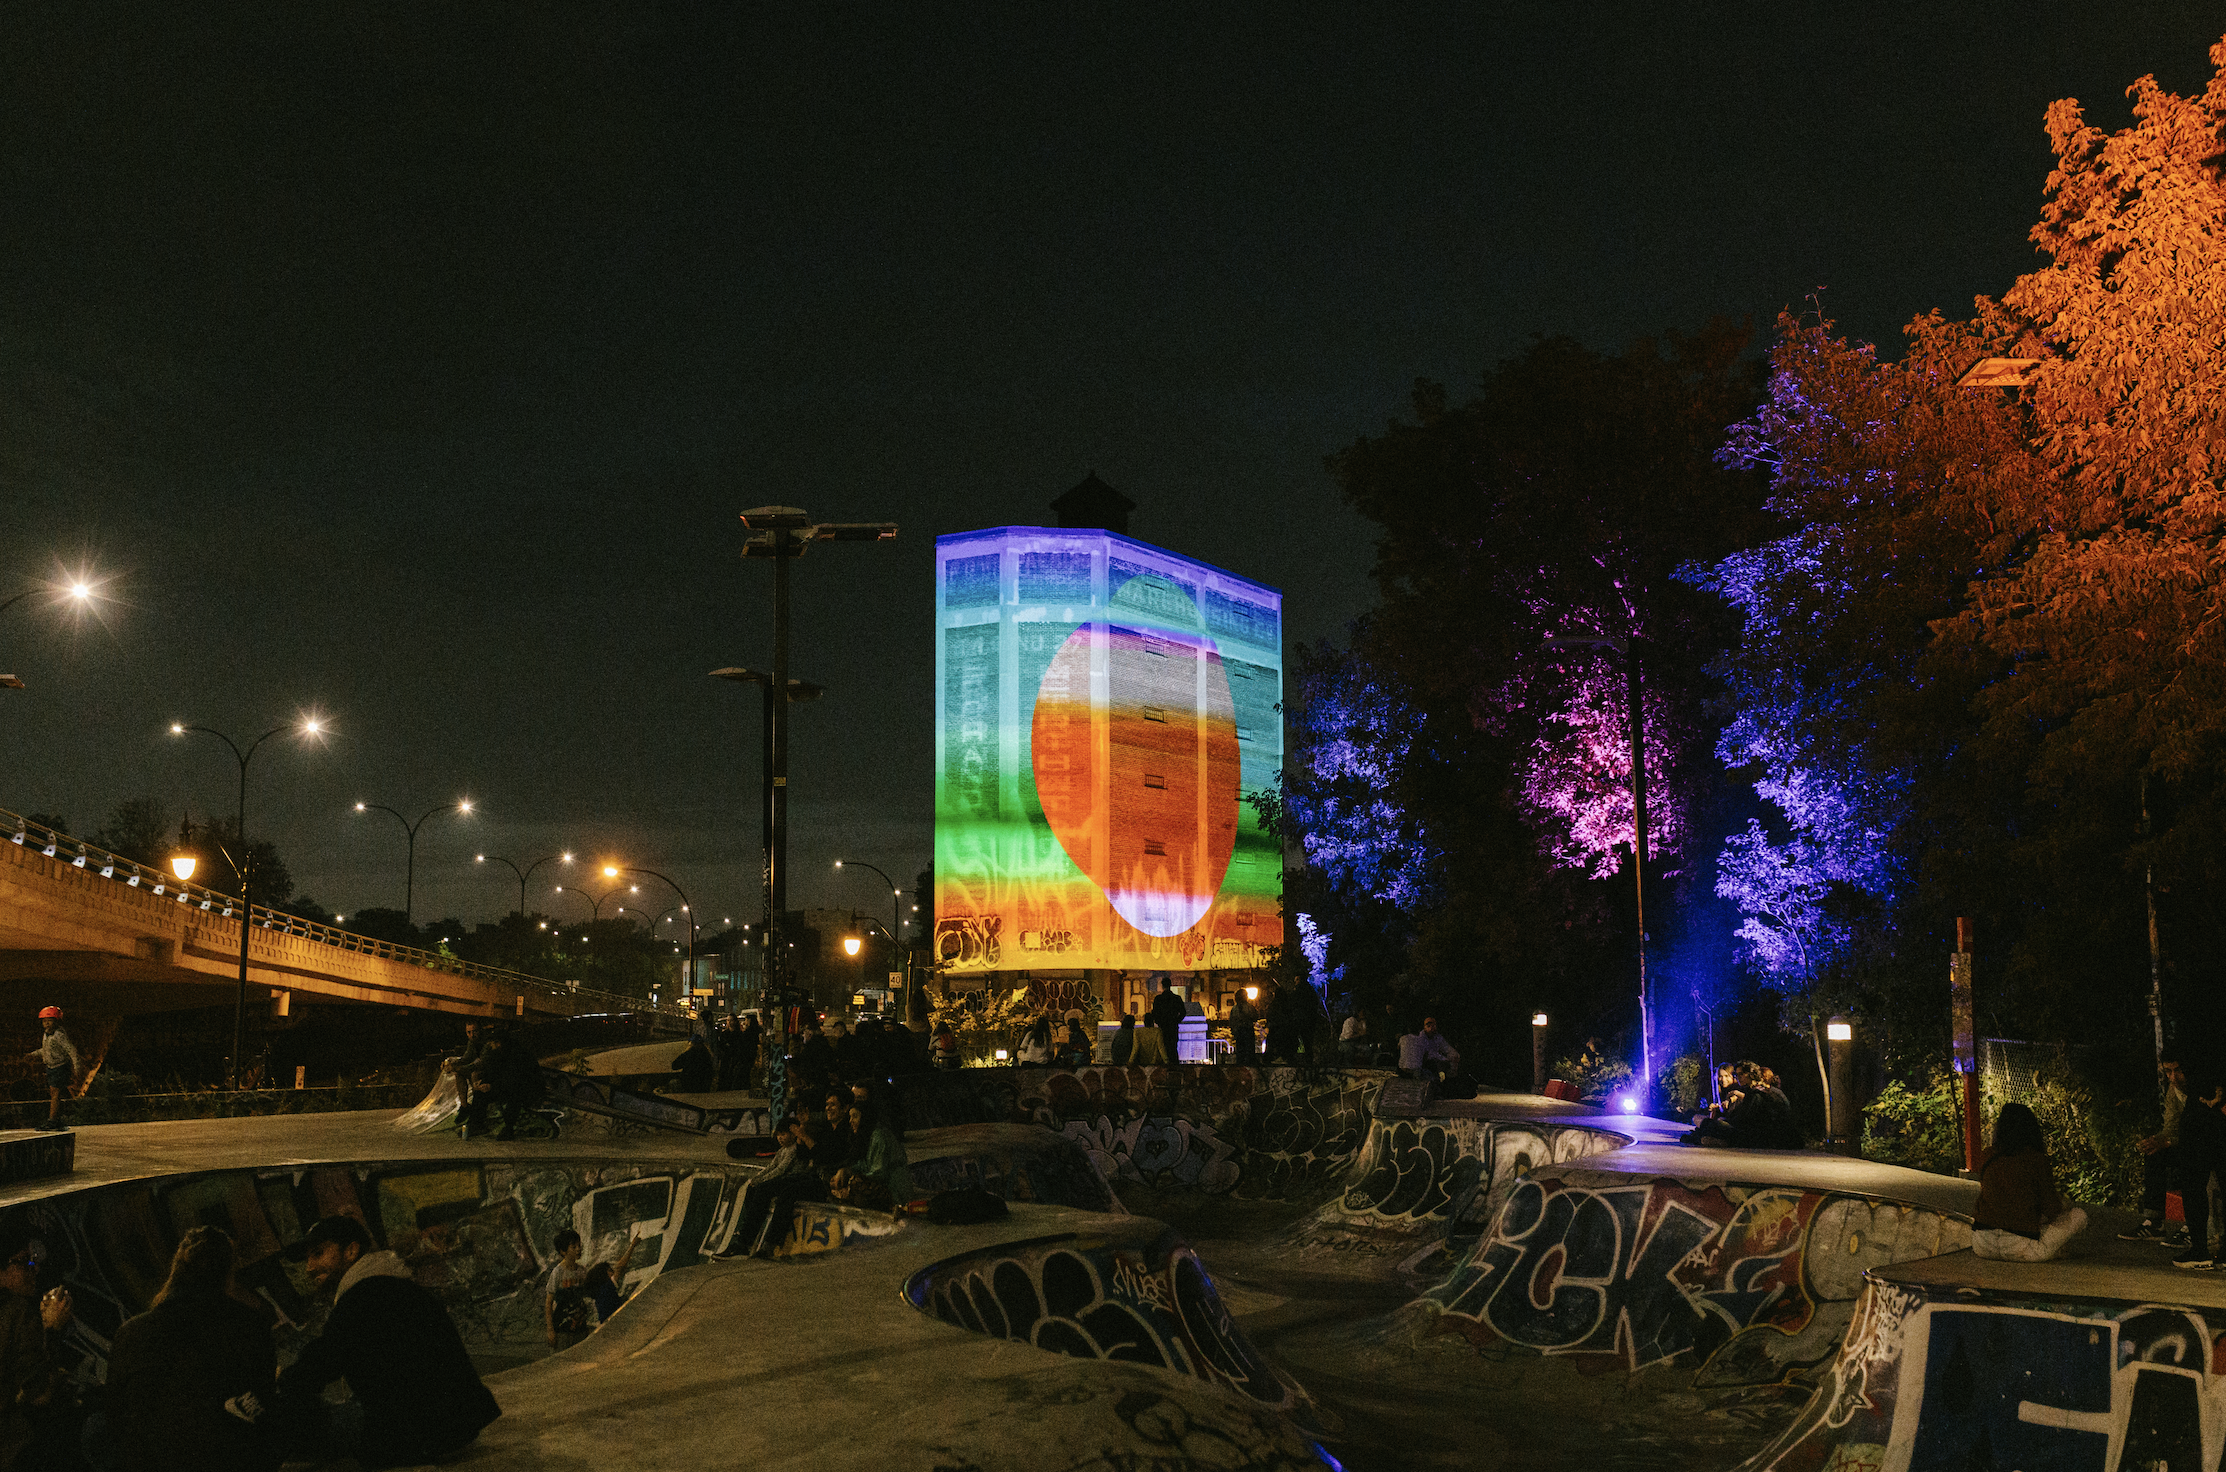 Des projets de projections mapping